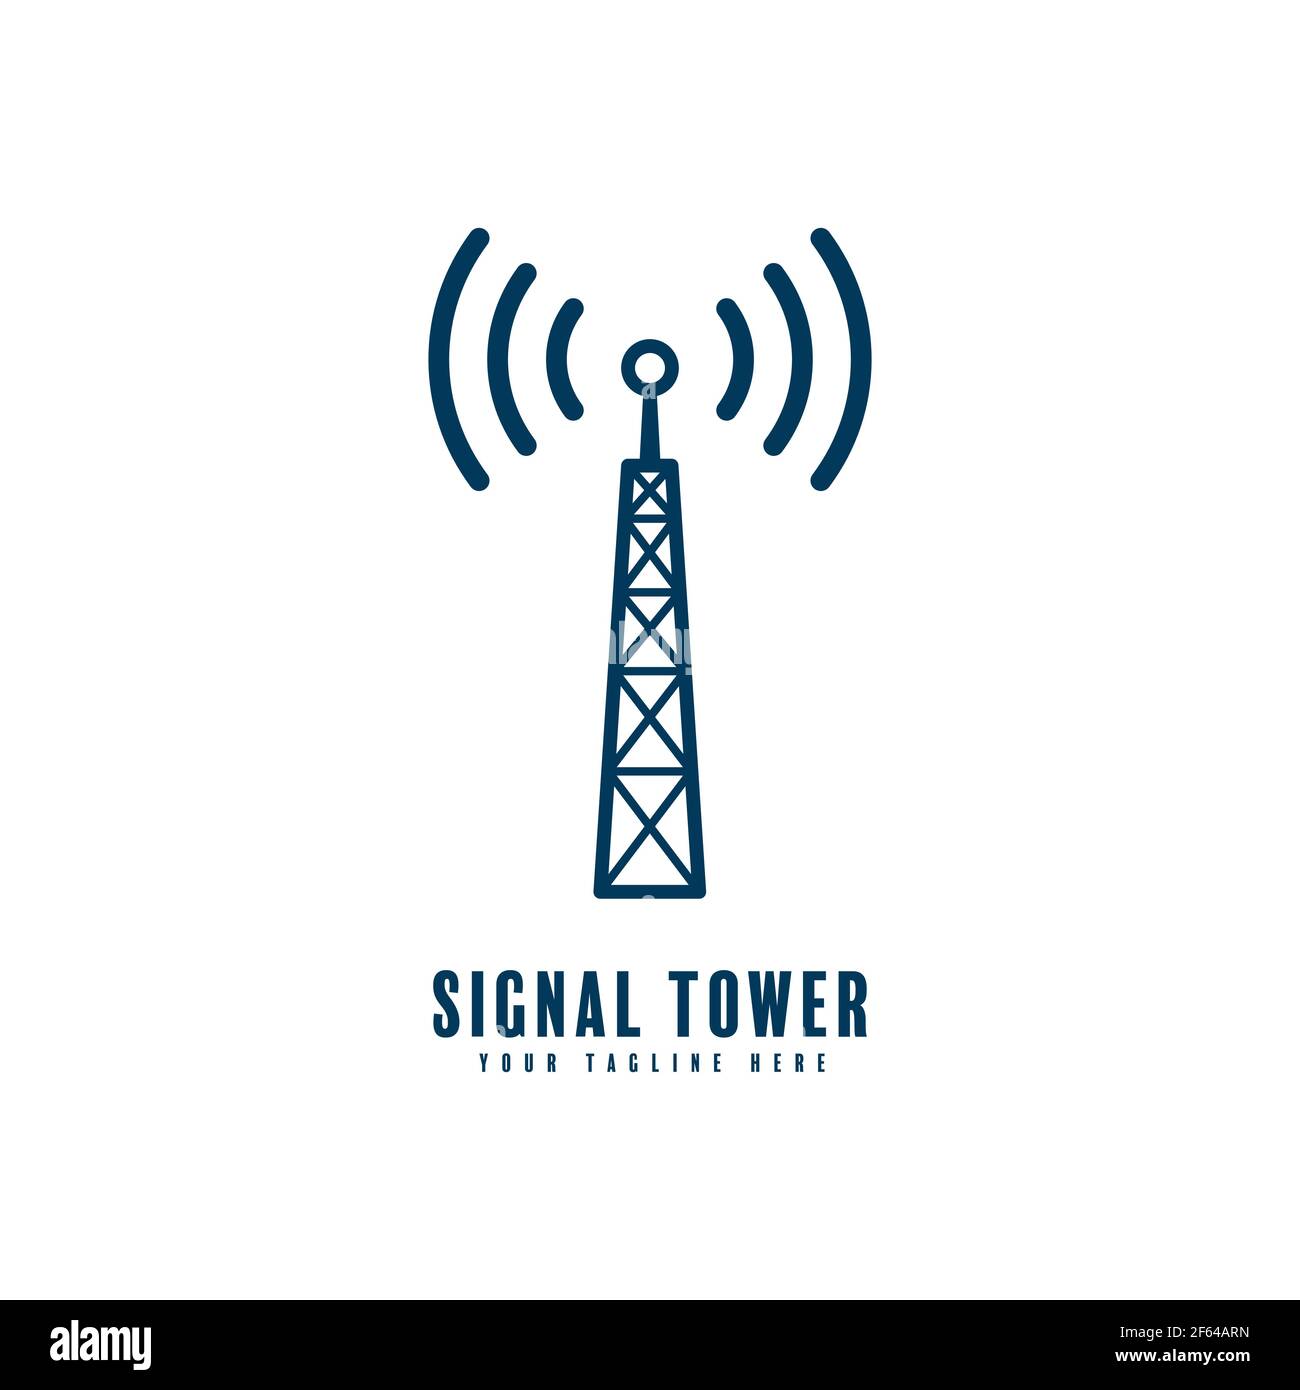 signal tower logo vector design silhouette isolated on white background Stock Vector